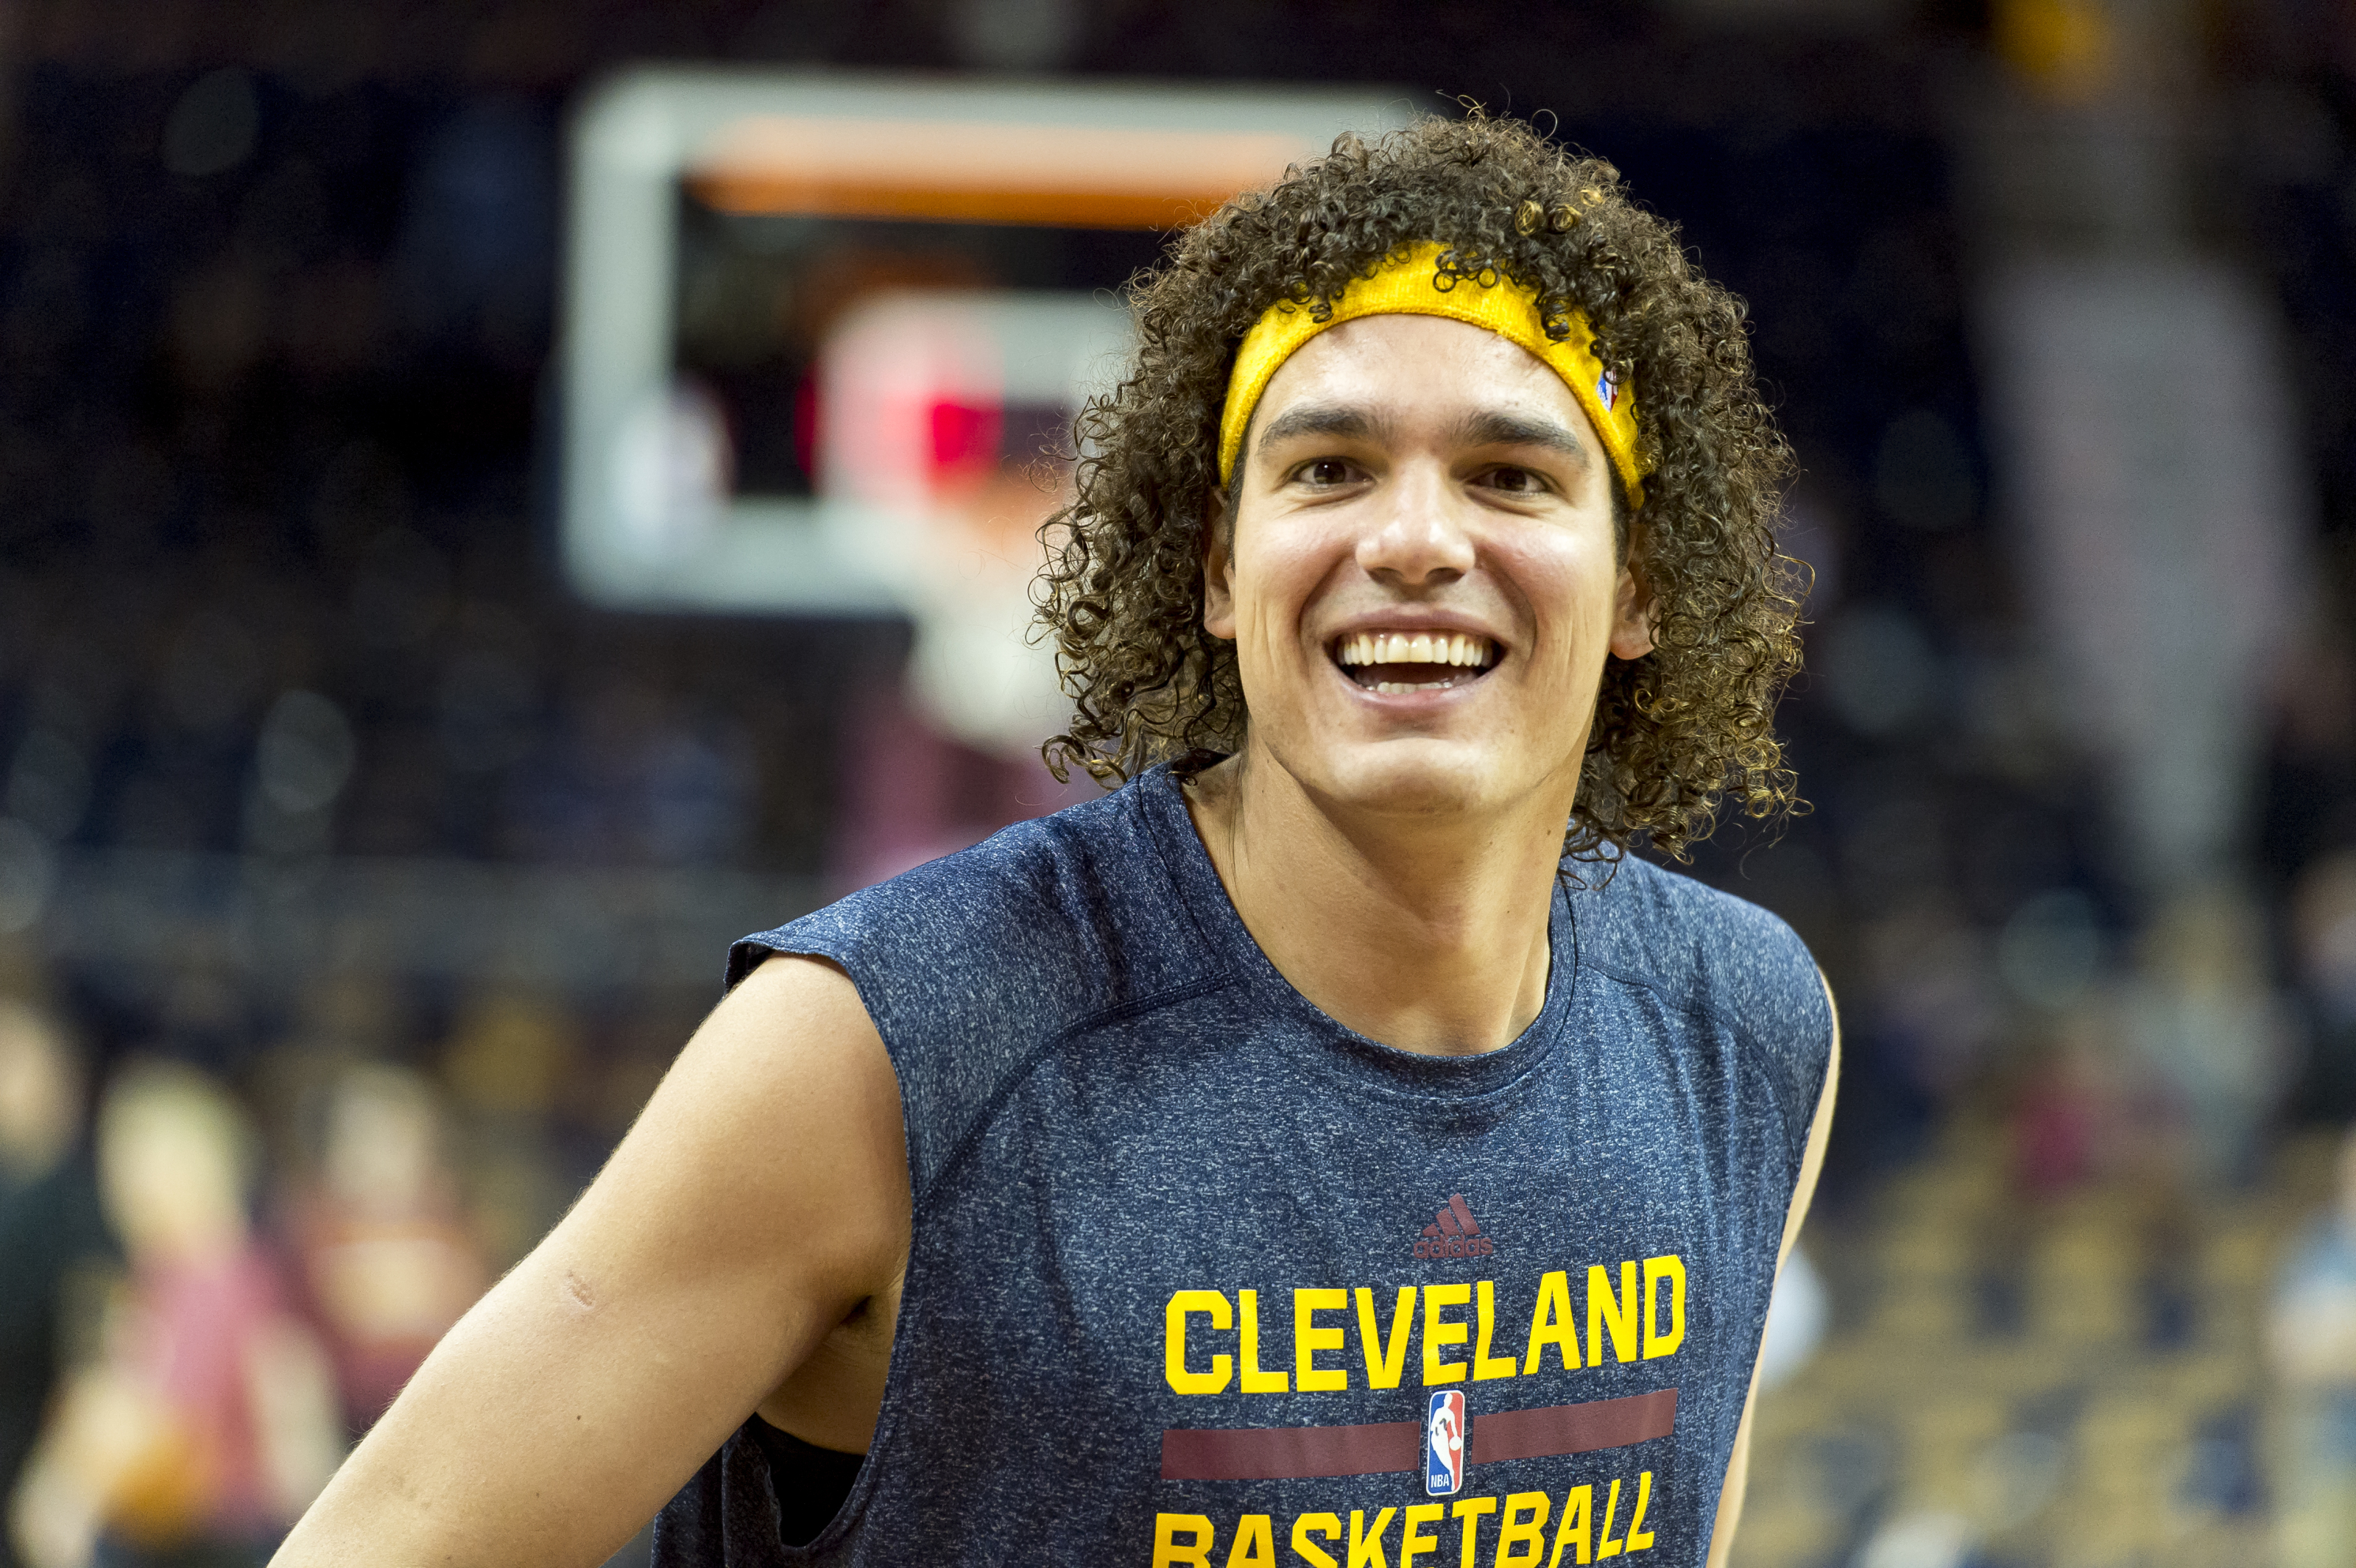 Anderson Varejao gets his retirement sendoff with Cleveland Cavaliers